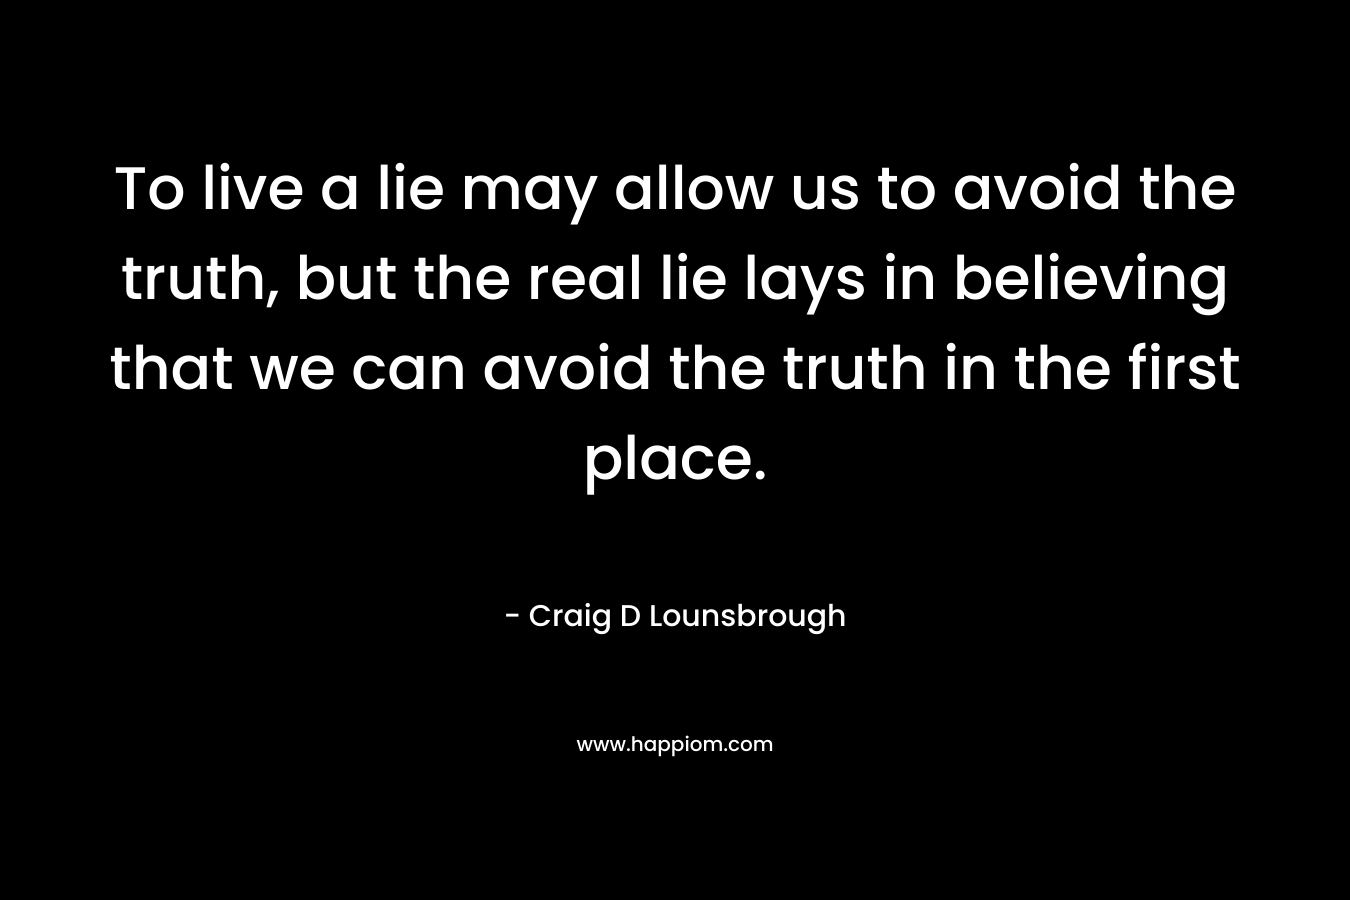 To live a lie may allow us to avoid the truth, but the real lie lays in believing that we can avoid the truth in the first place.